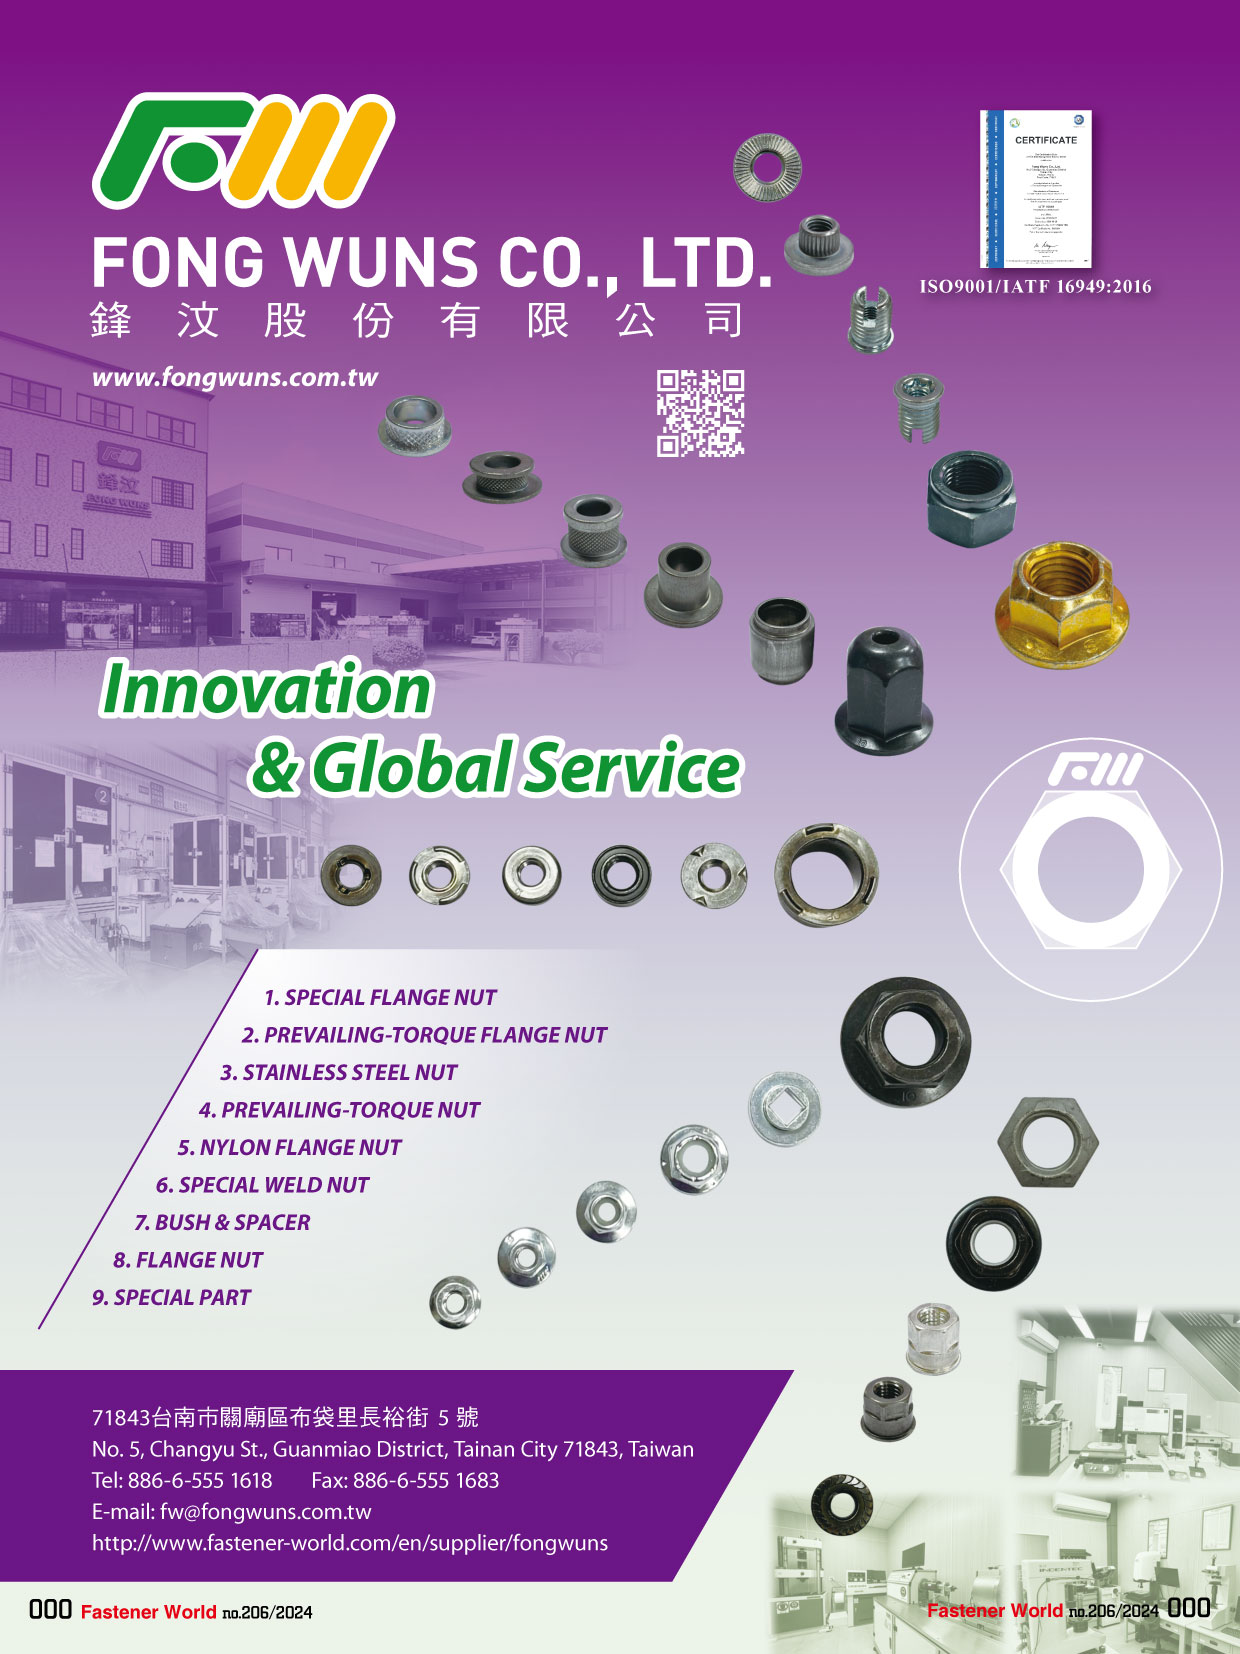 FONG WUNS CO., LTD.  , Special Flange Nut, Prevailing-Torque Flange Nut, Stainless Steel Nut ,Prevailing-Torque Nut, Nylon Flange Nut, Special Weld Nut, Wheel Nut, Flange Nut, Special Part